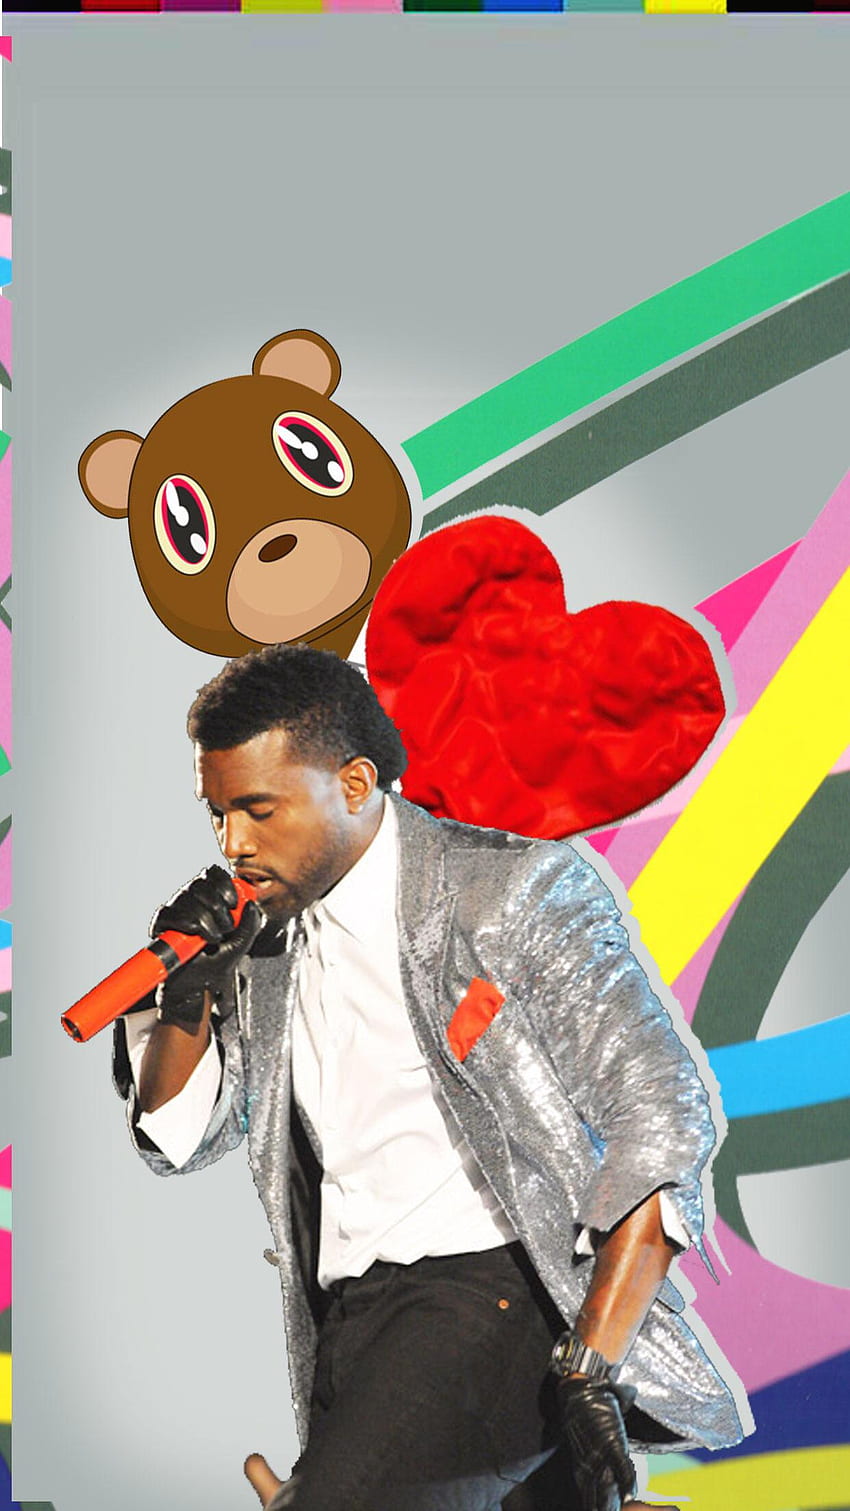 808s  Heartbreak CUSTOM Wallpaper I put together Made to fit the iPhone  X Its a combination of two images I found on Google  rKanye